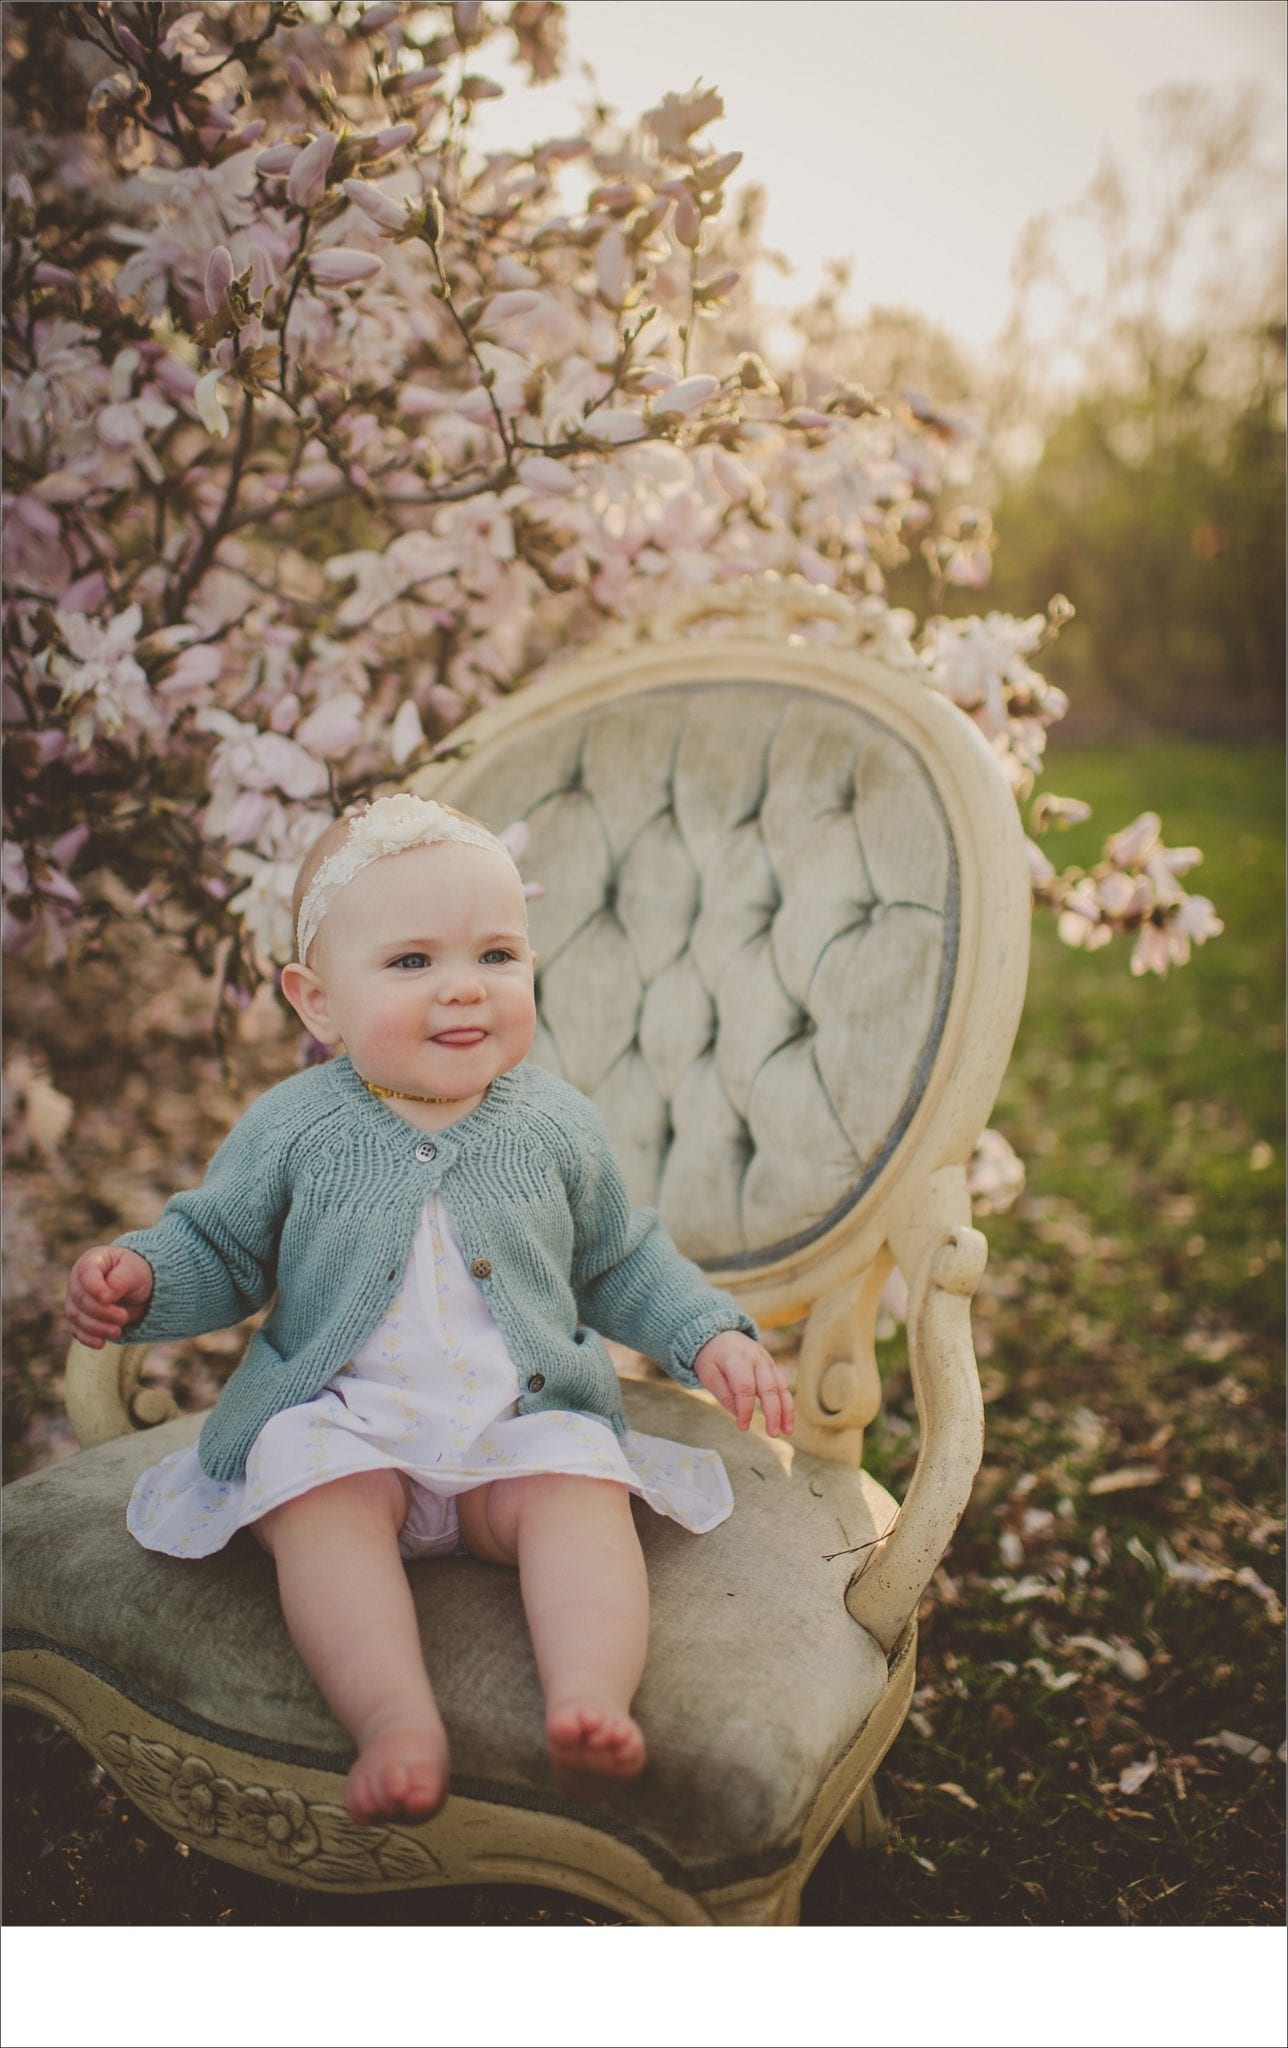 bonnets, hair flowers, chairs, backdrops, blossoms, sweater, outdoor sessions, Madison area photographers